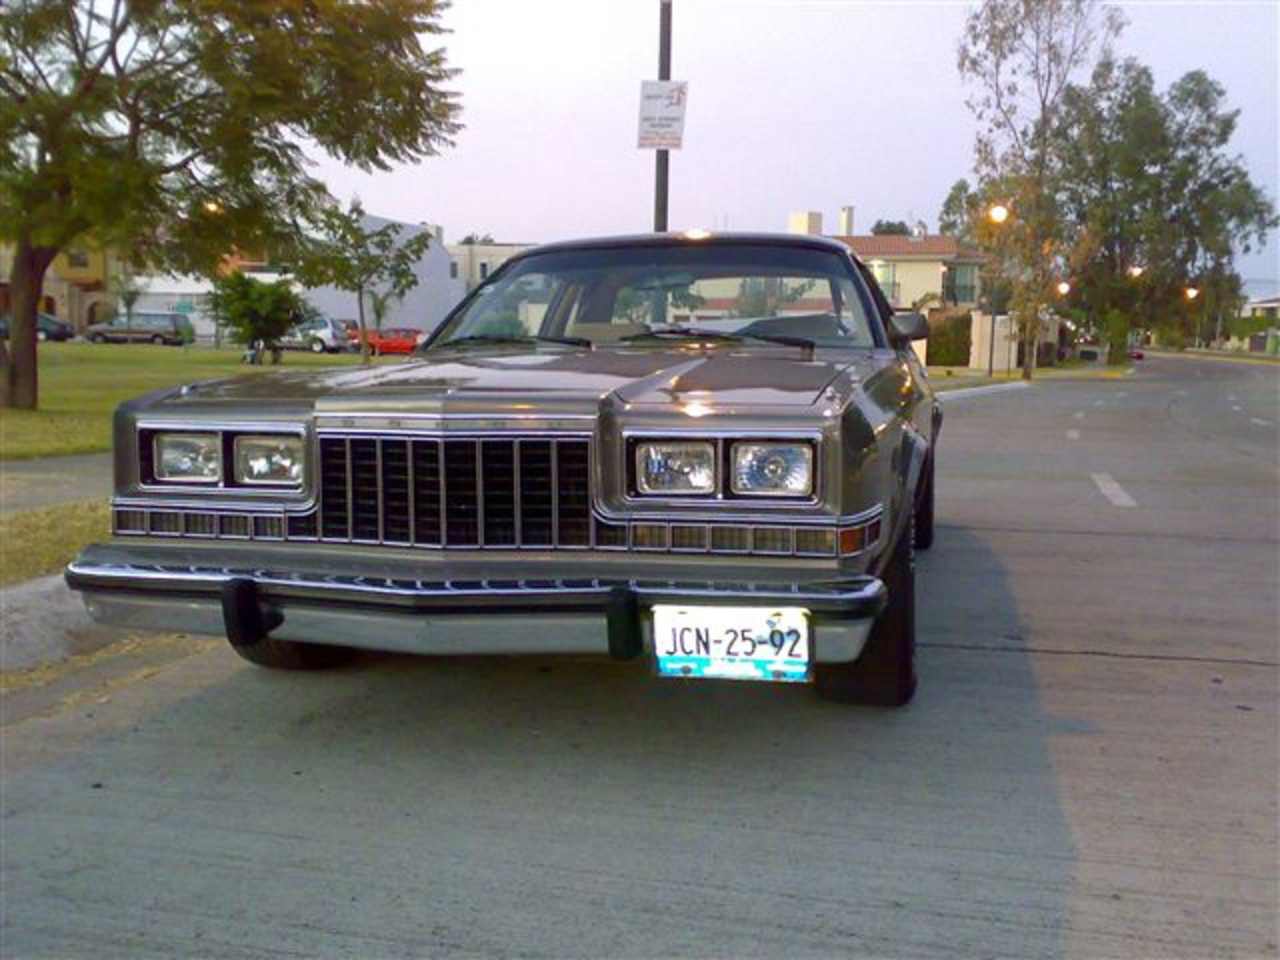 82 Dodge Dart Coupe | Flickr - Photo Sharing!